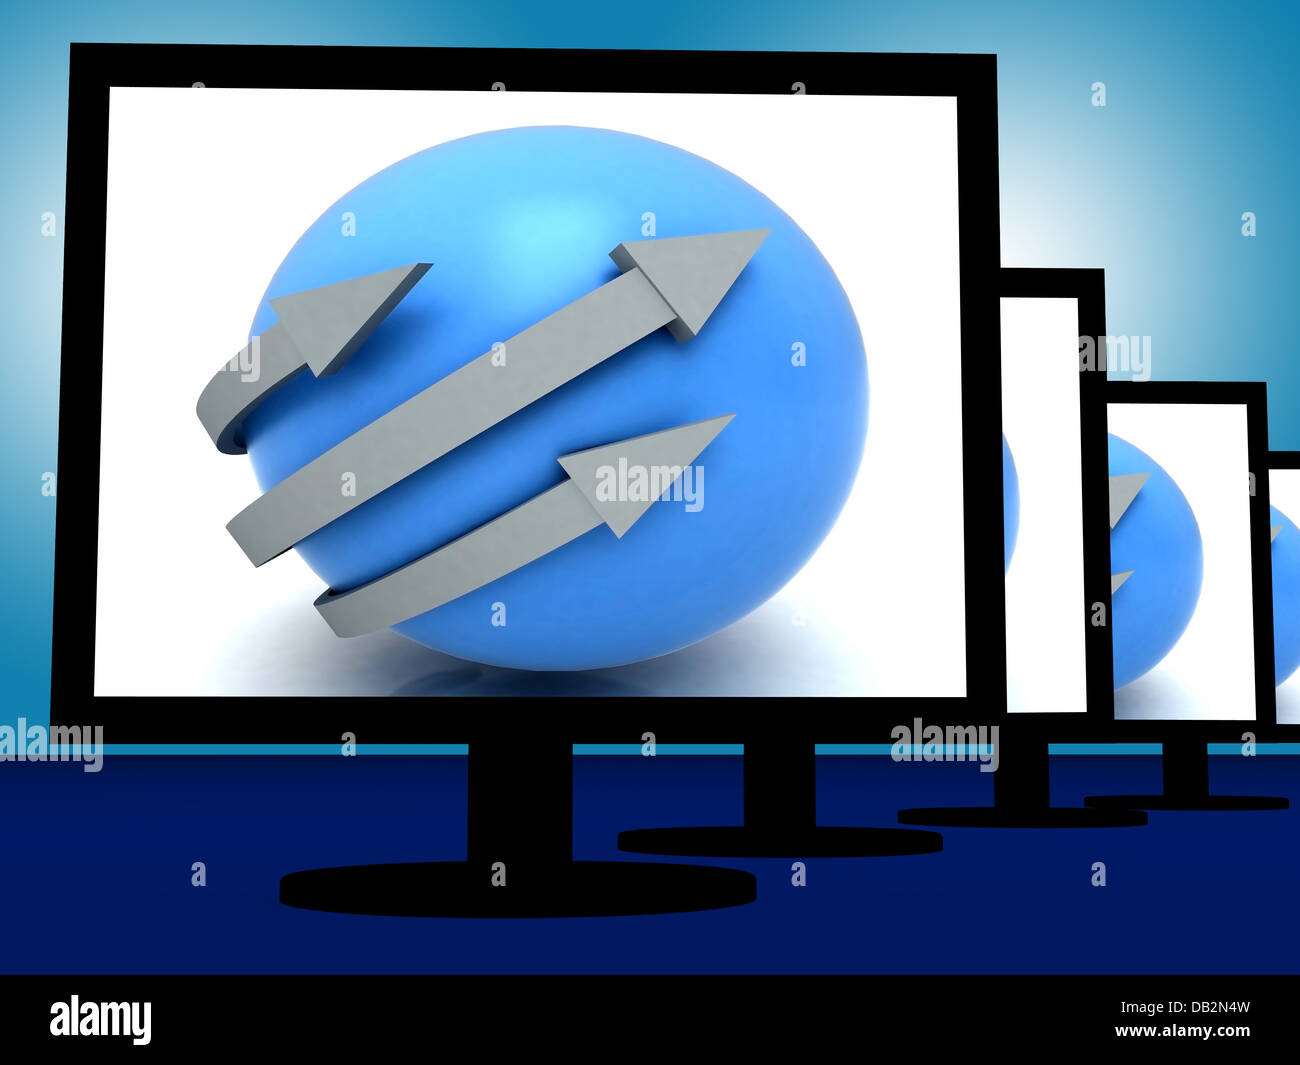 Arrows Around Ball On Monitors Shows Circular Direction Stock Photo